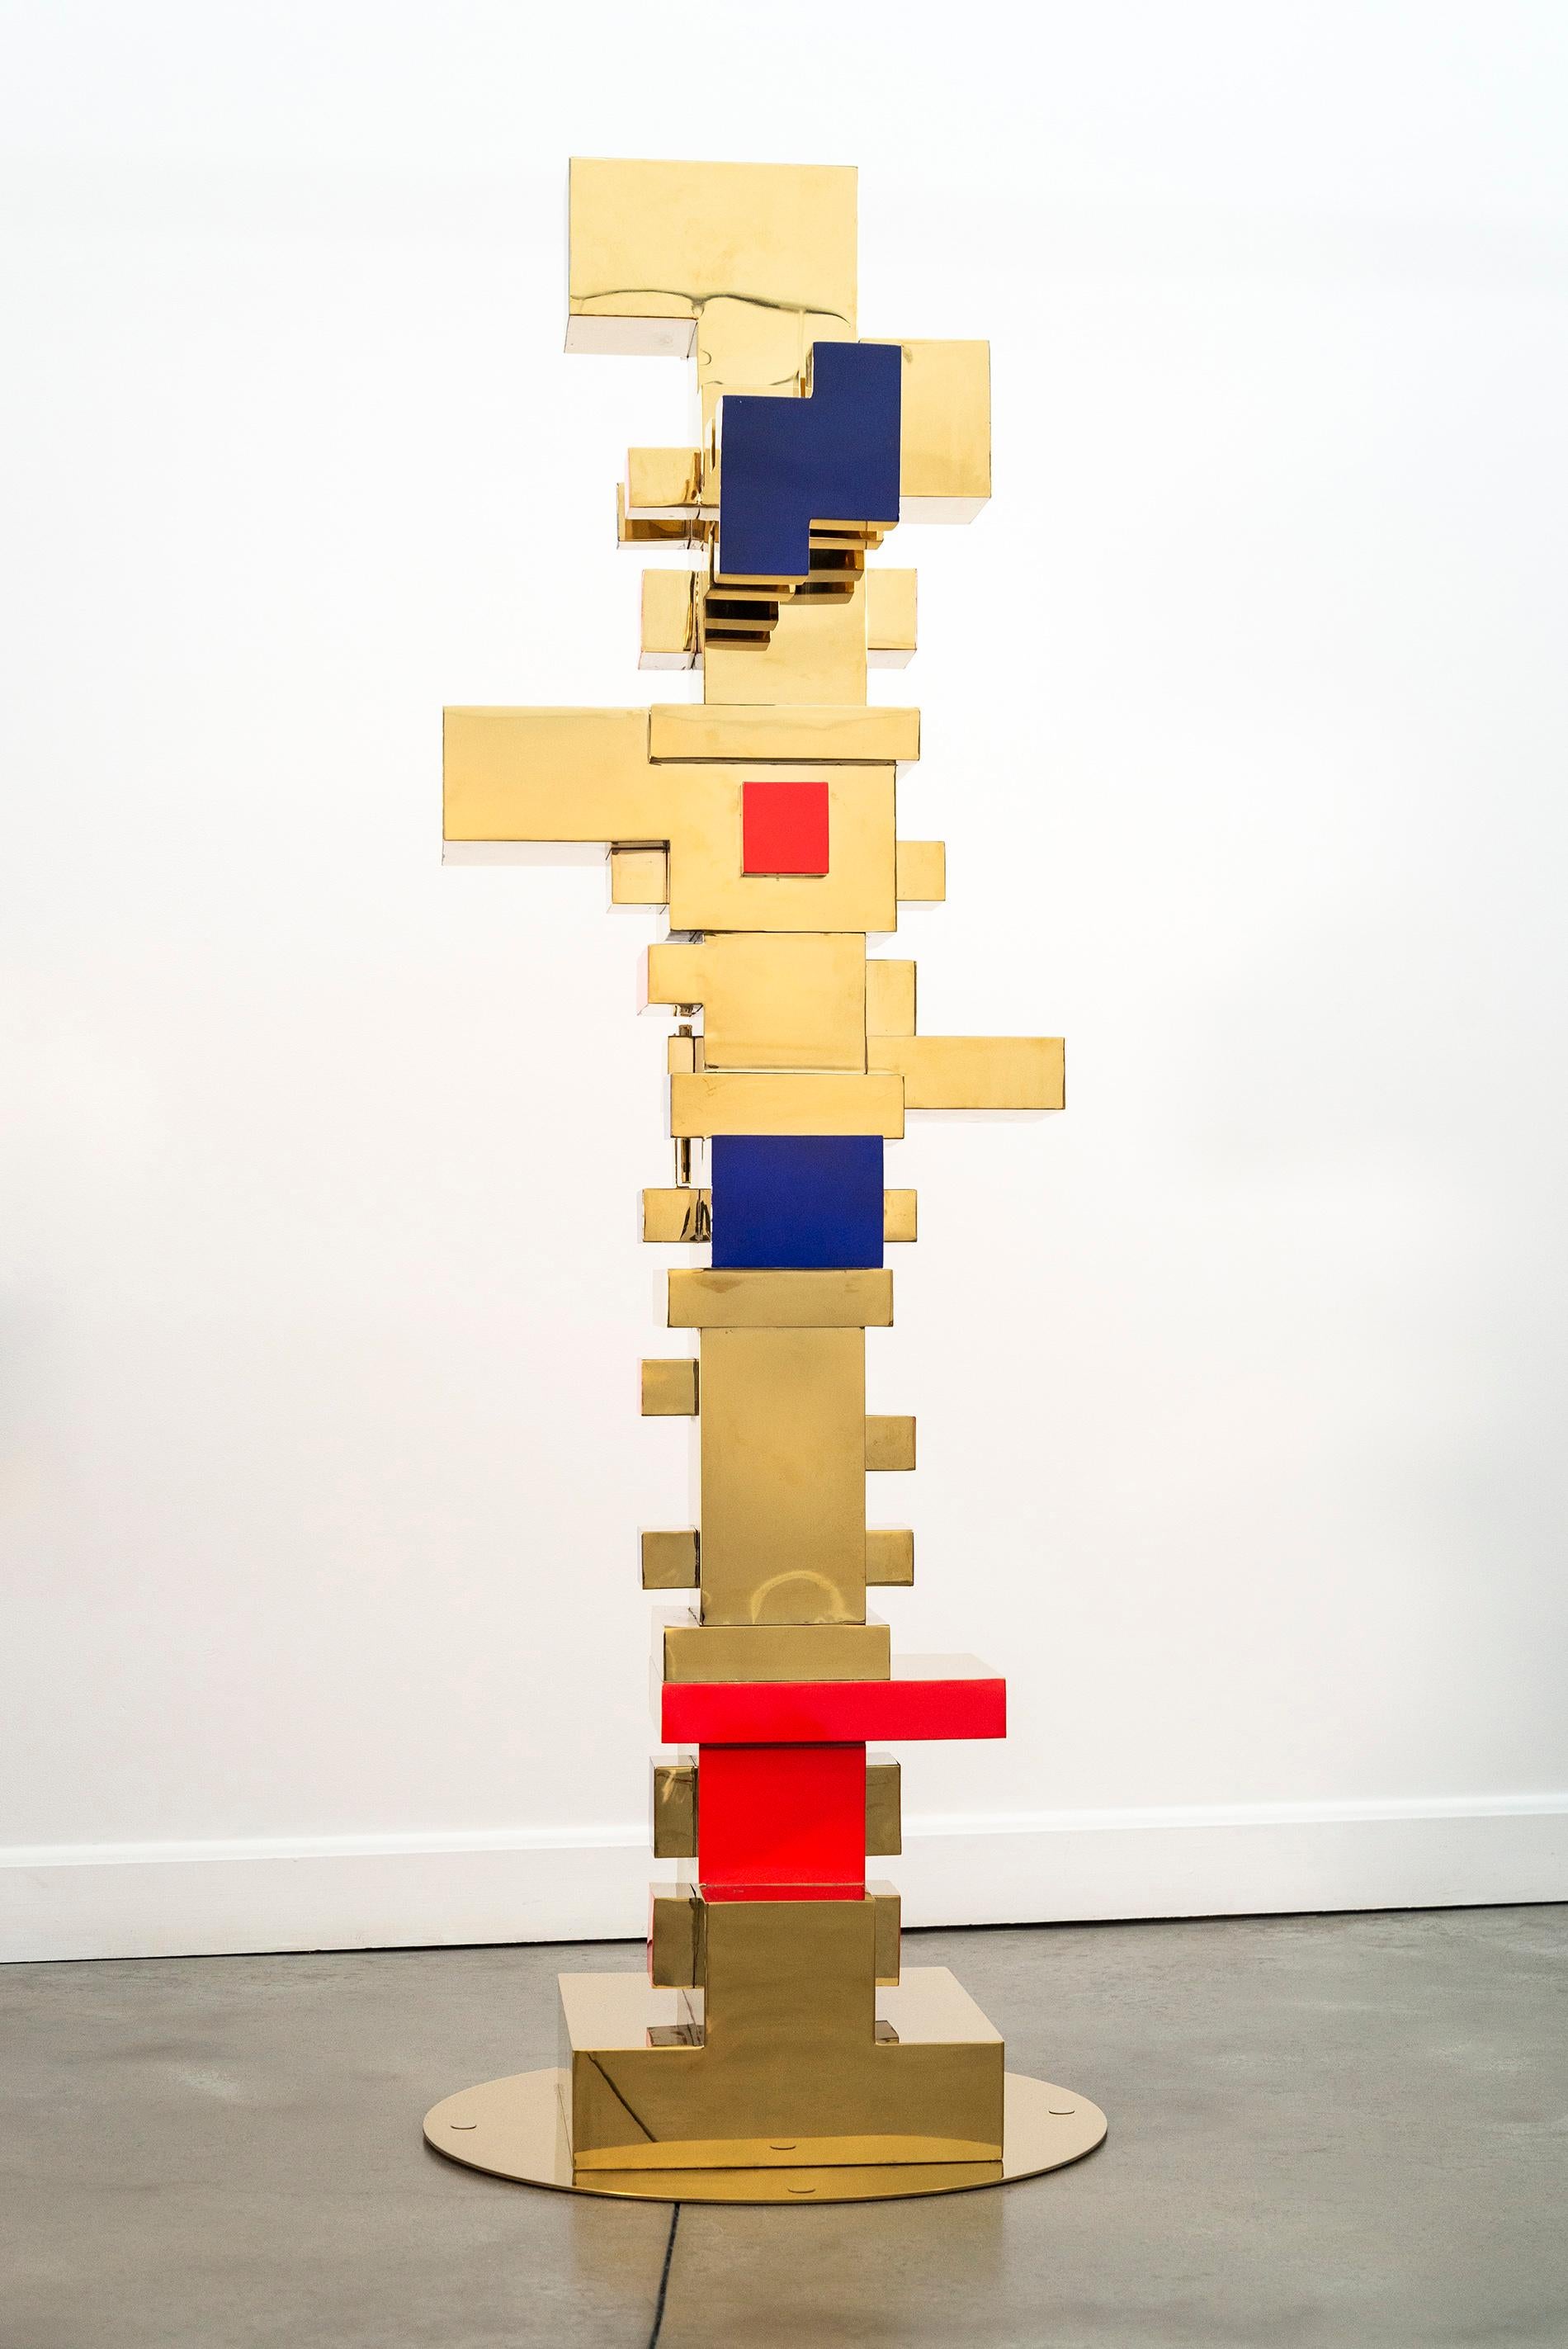 Stacked Blocks - Gold, Red, Blue - totem, gold plated, stainless steel sculpture - Sculpture by Viktor Mitic